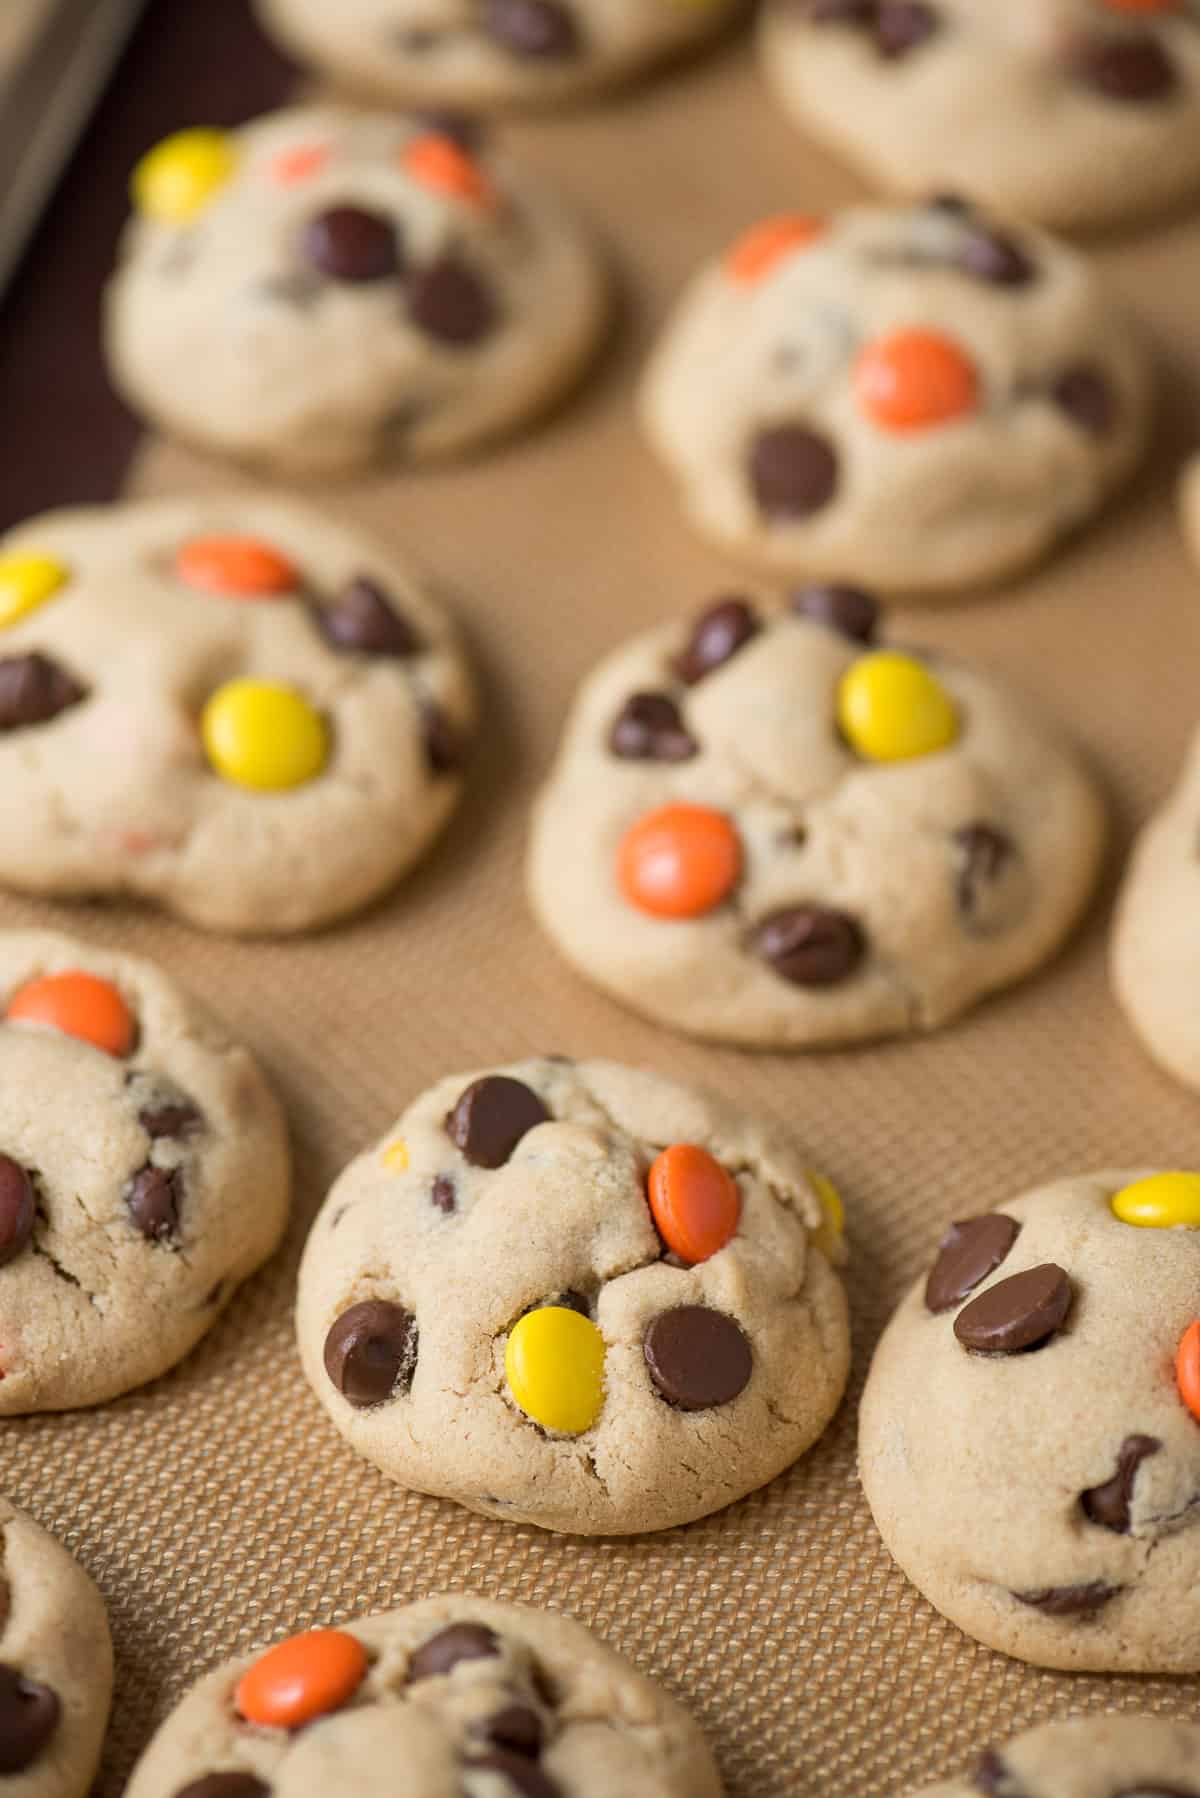 peanut butter cookies with reese's pieces candies and chocolate chips on metal baking sheet